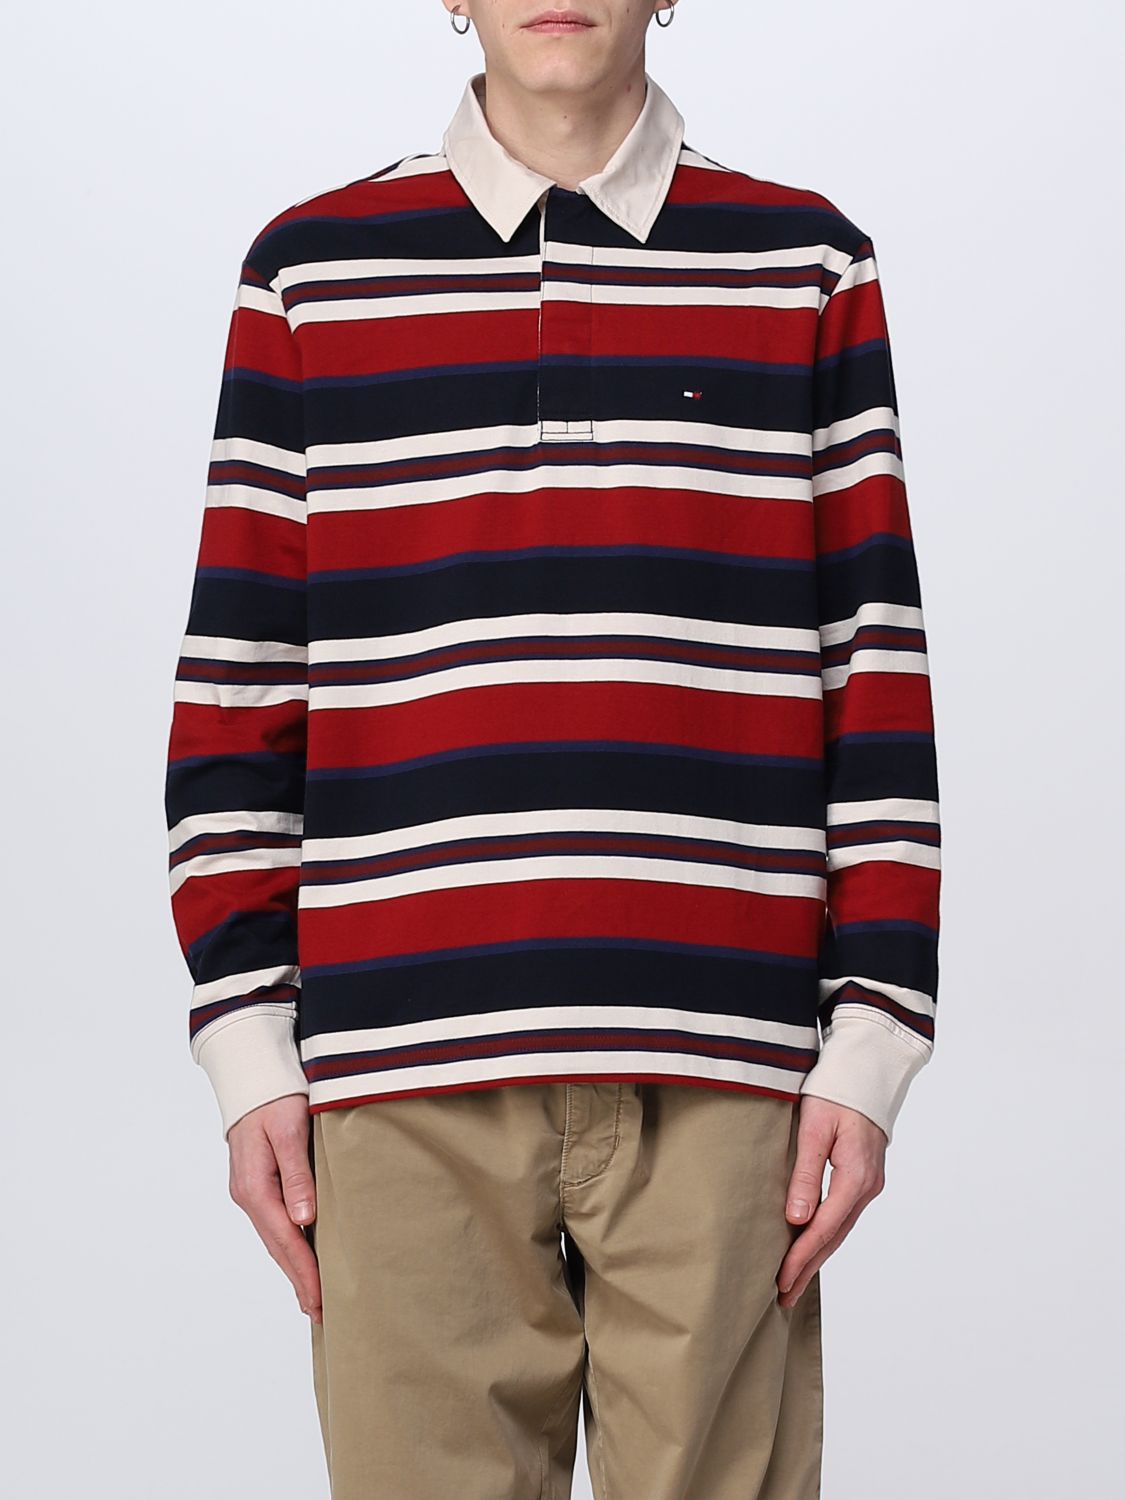 Tommy Hilfiger Outlet: polo for man - Red | Tommy Hilfiger polo shirt MW0MW29671 online at GIGLIO.COM